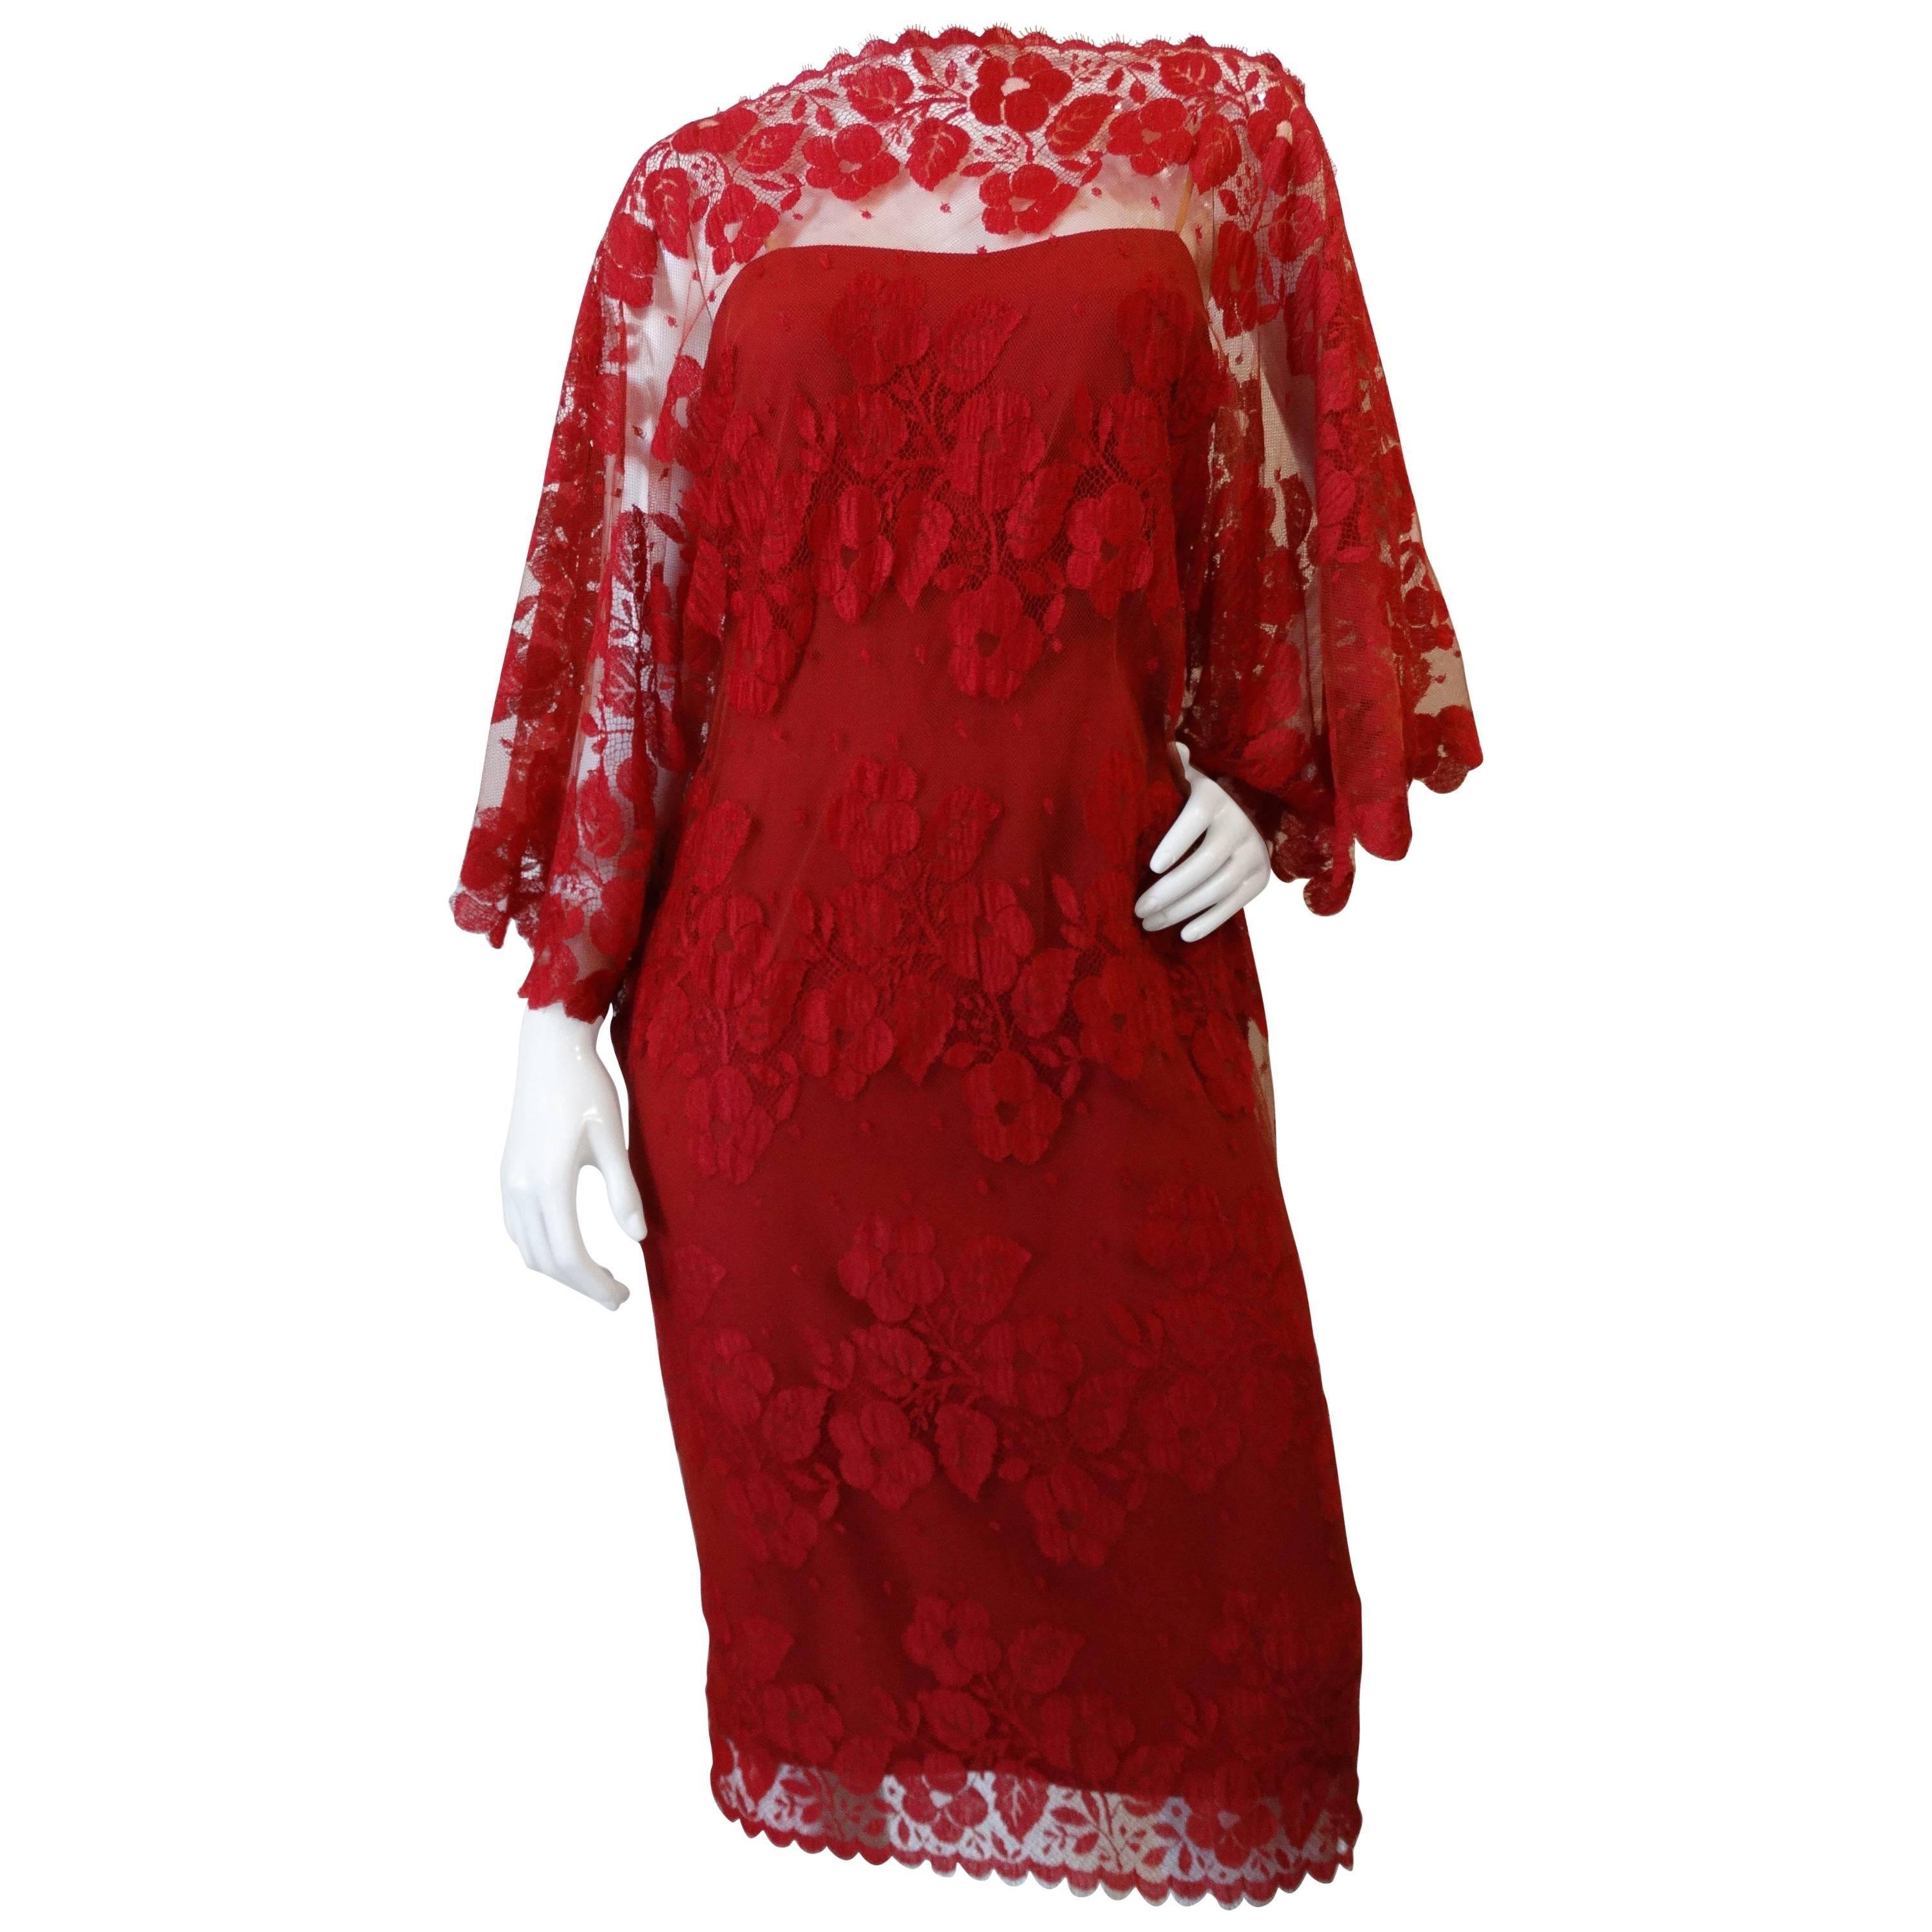 1960s Werle Beverly Hills Red Lace Evening Dress